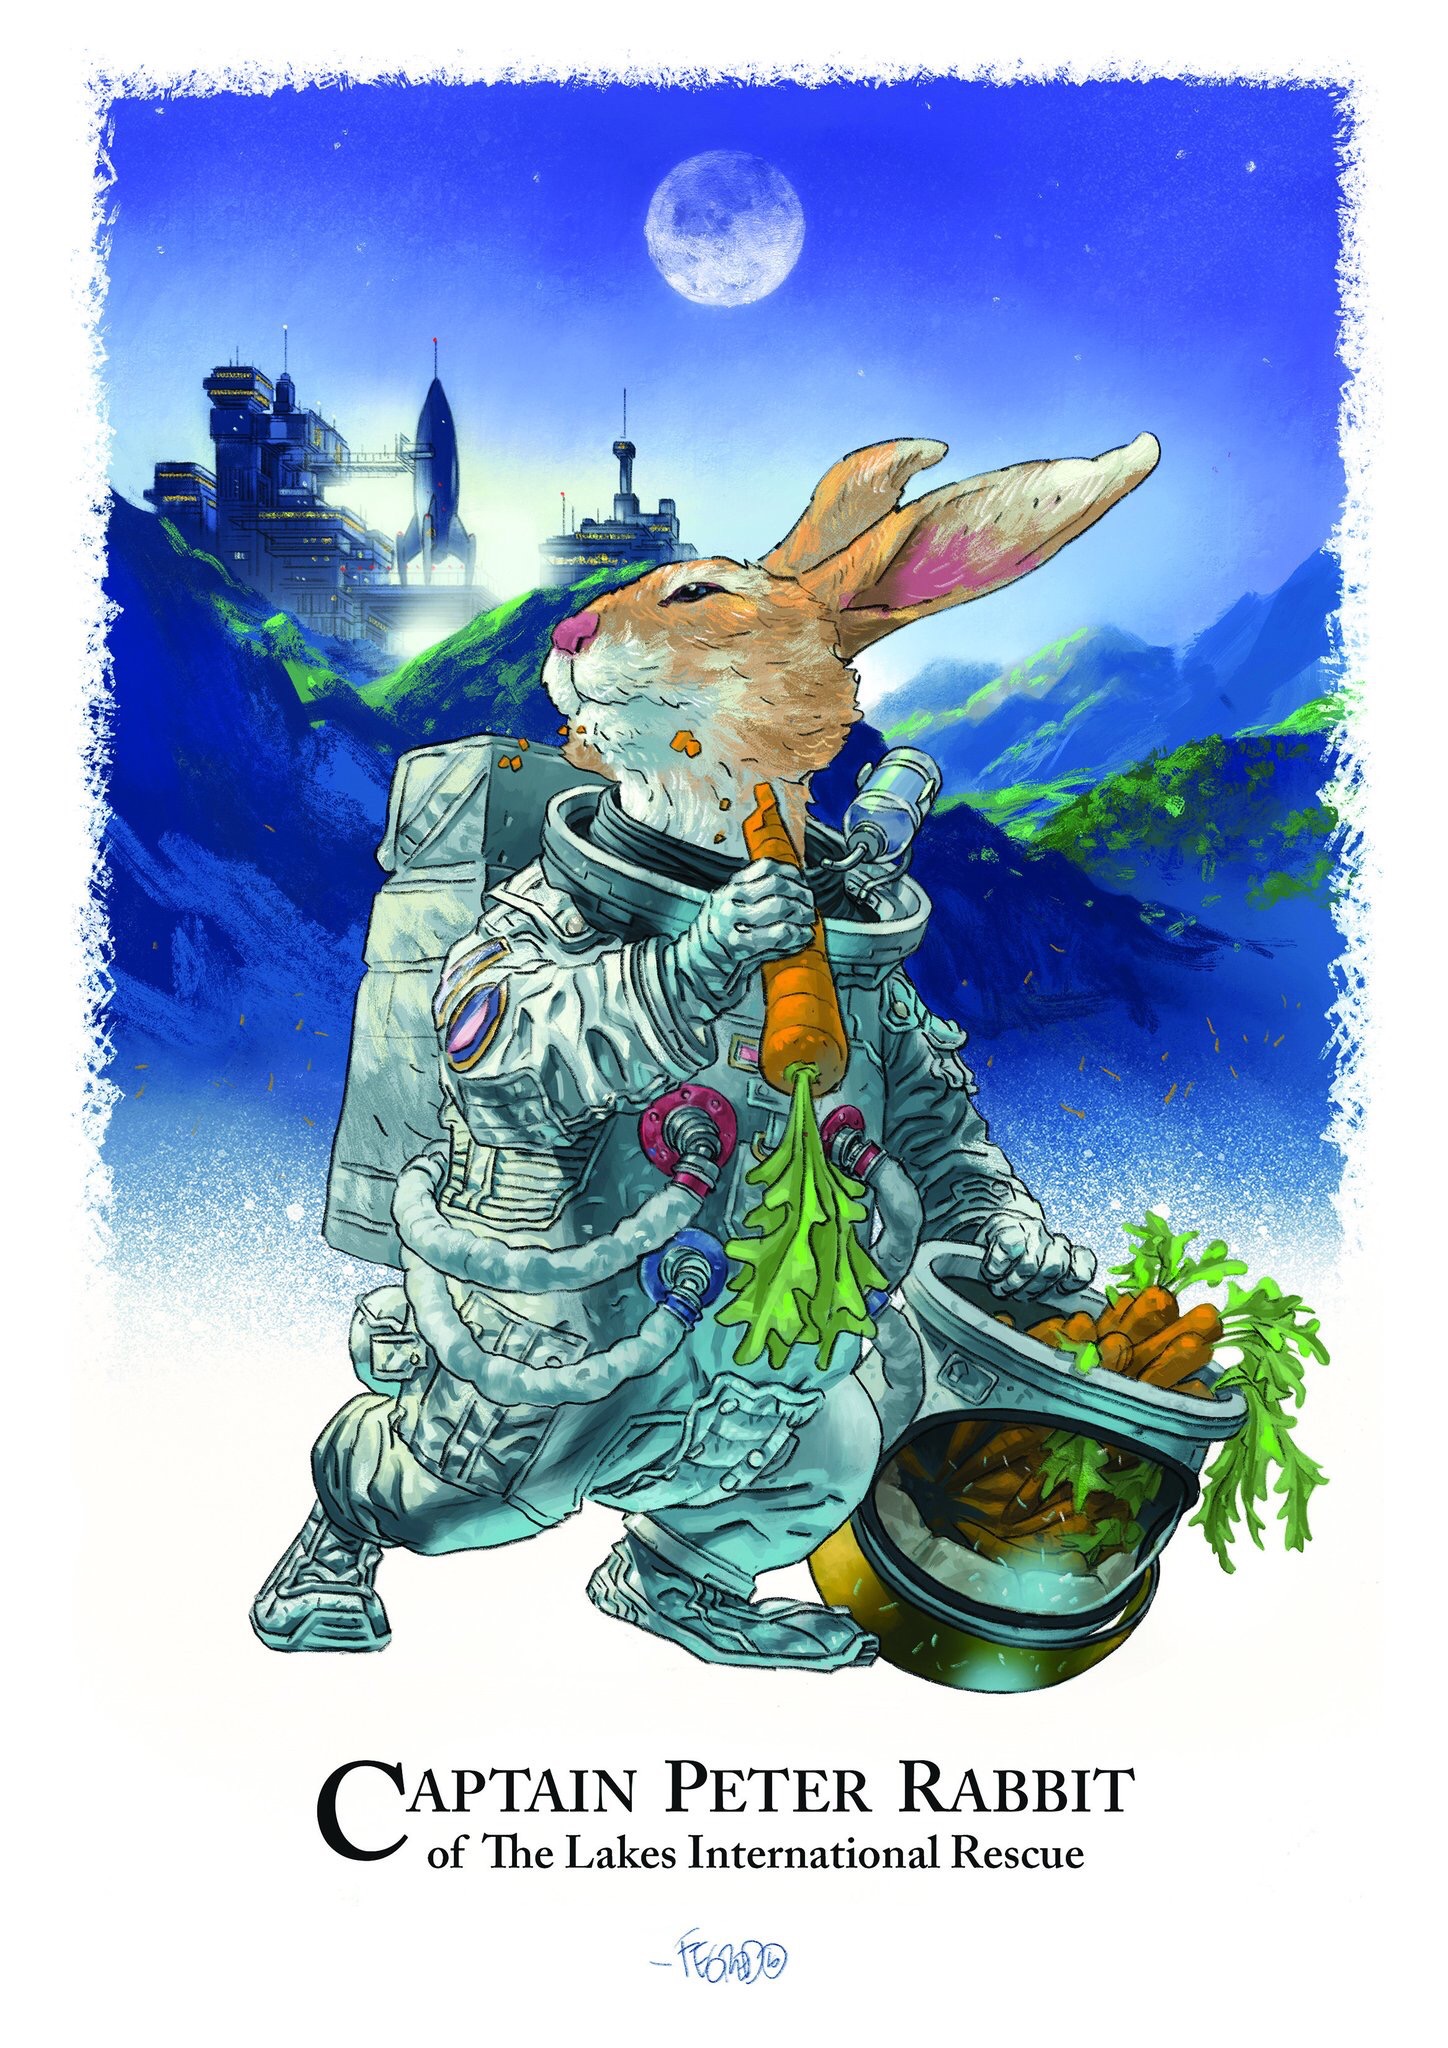 Captain Peter Rabbit of The Lakes International Rescue by Duncan Fegredo